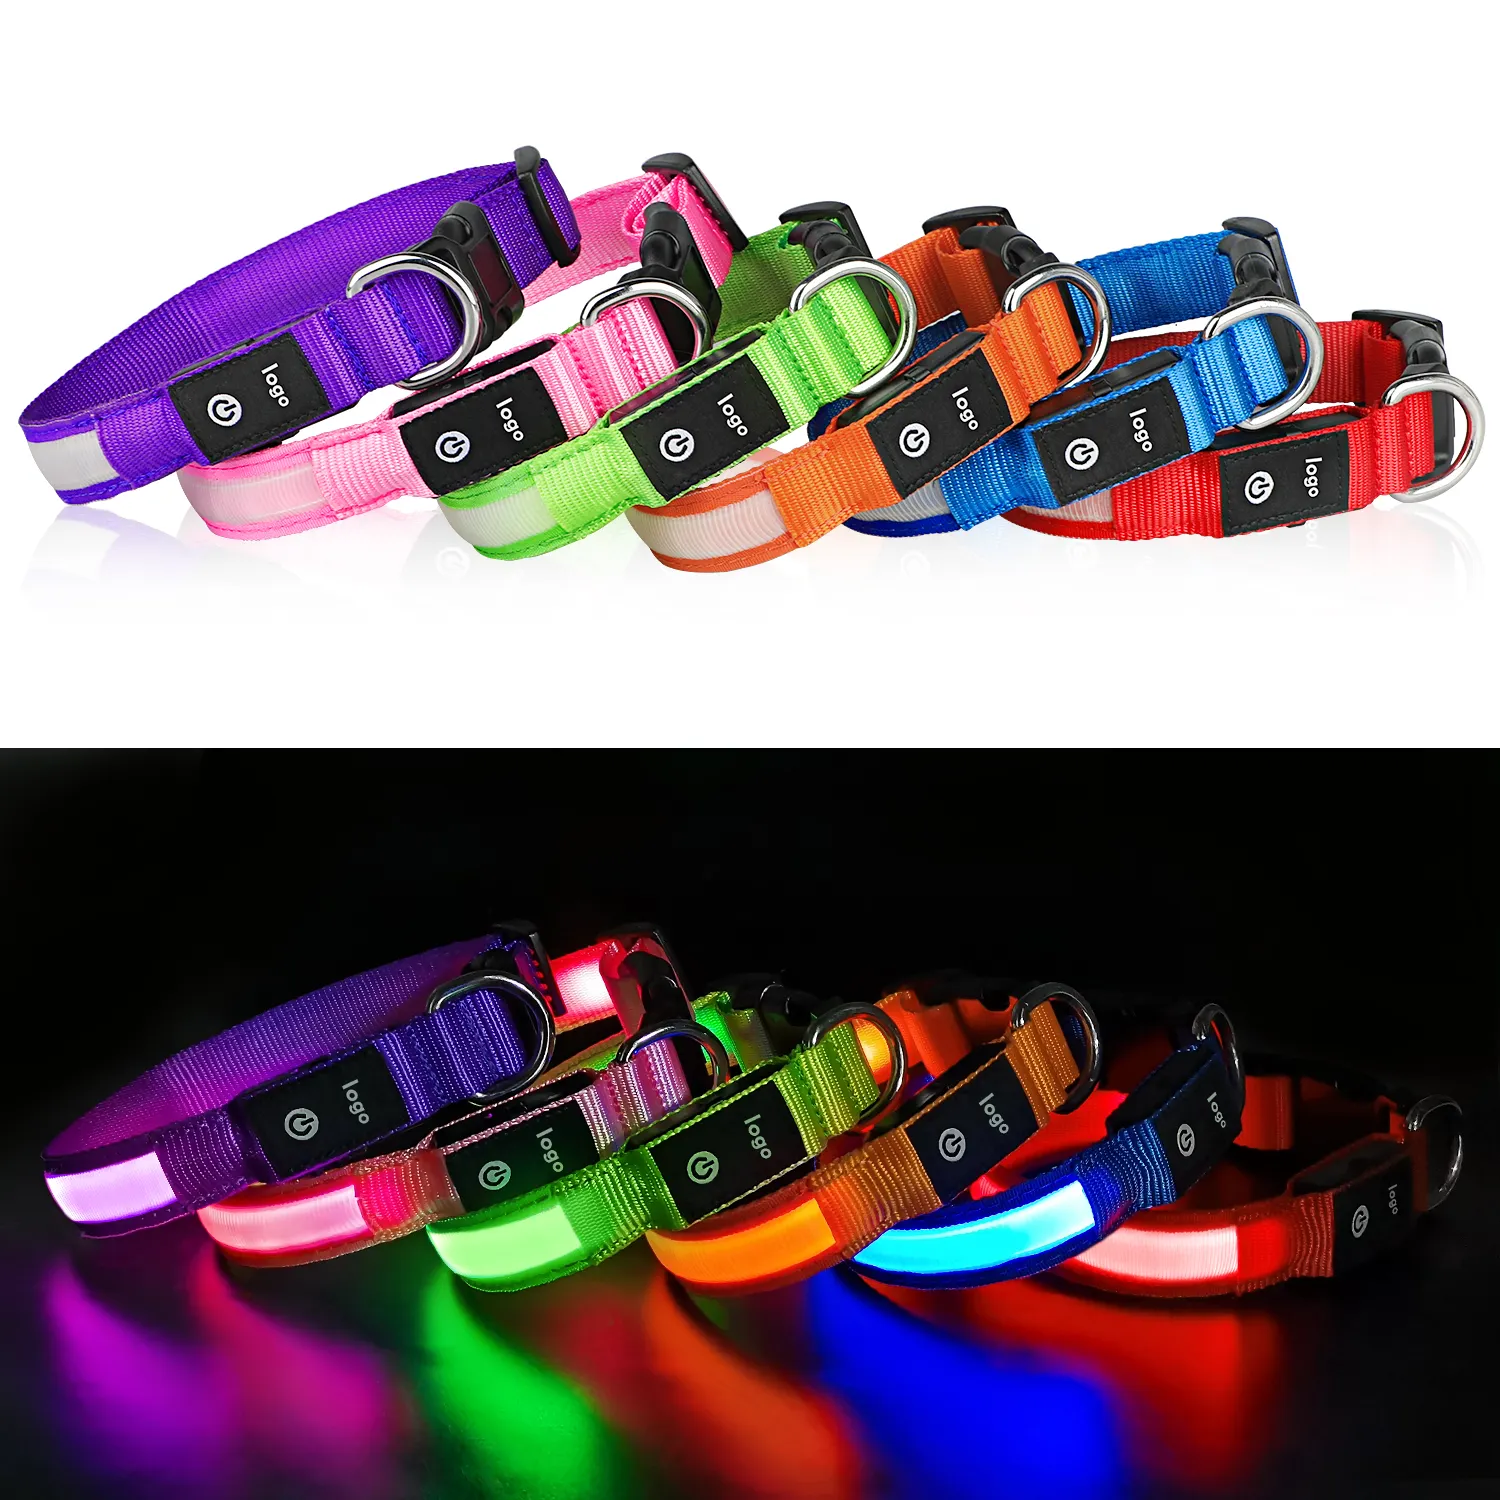 Factory Produce Perros Pet Supplies Usb Rechargeable Light Up Perros Led Pet Dog Collar For Dog